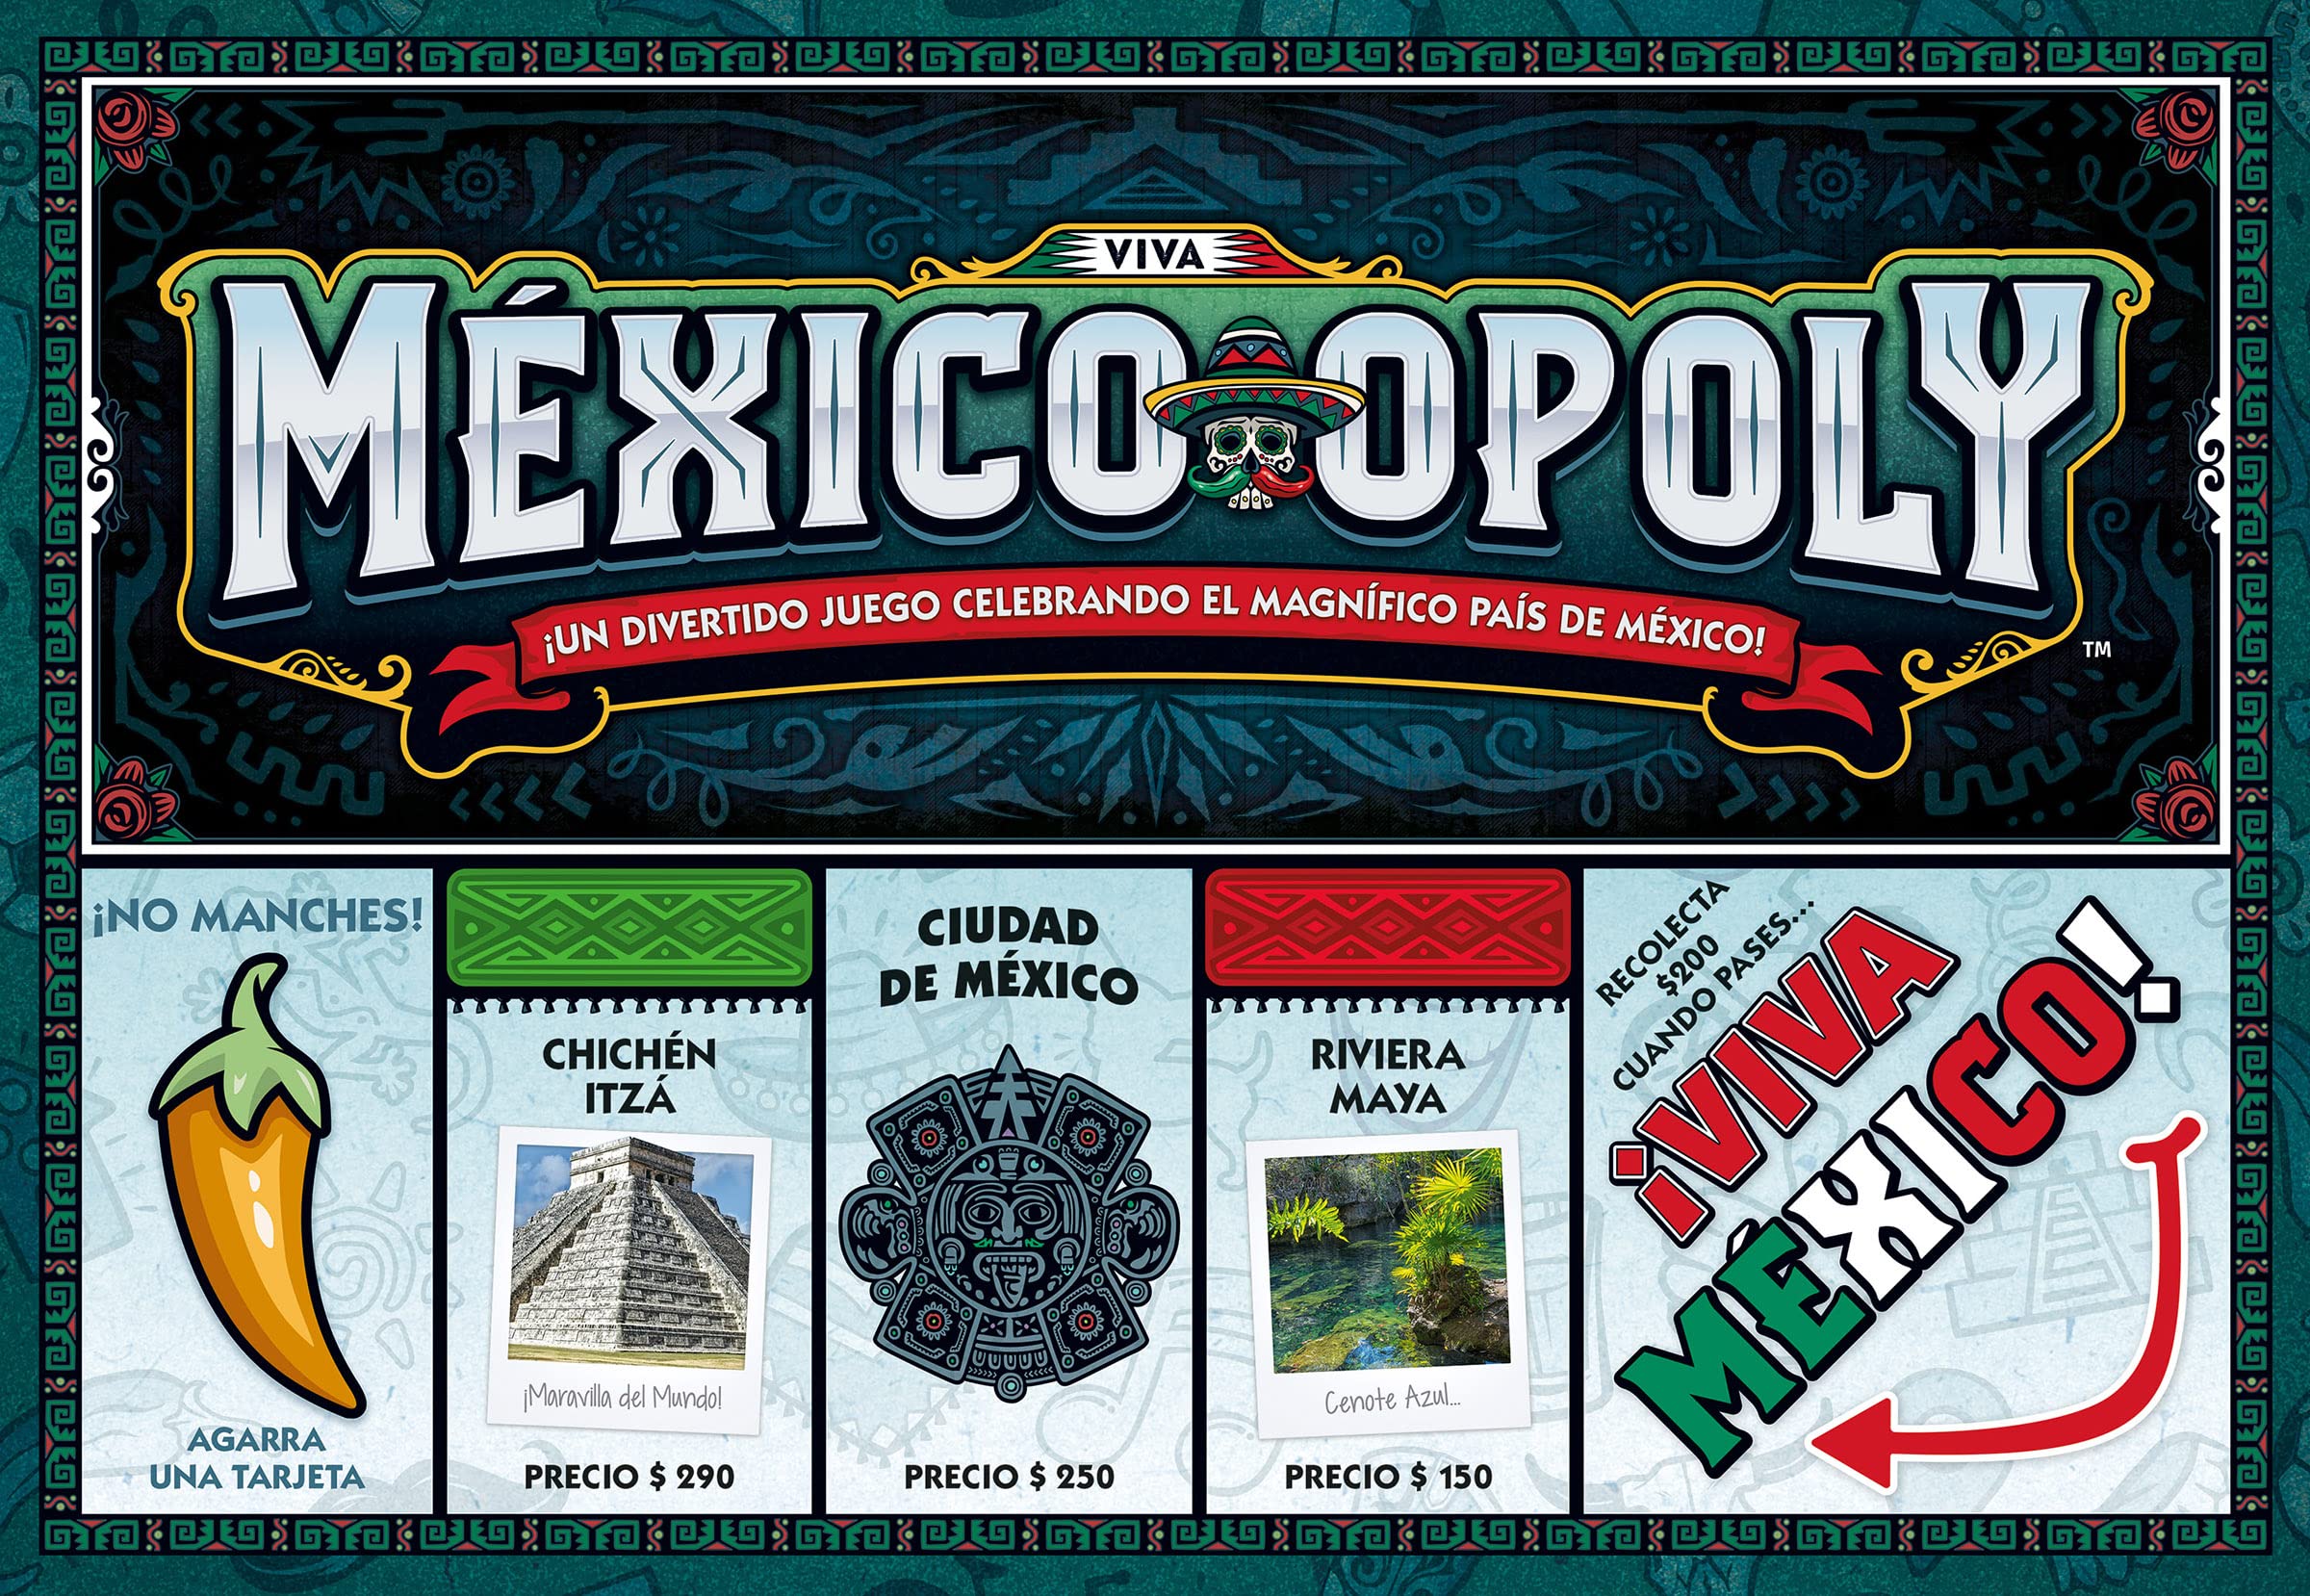 Late for the Sky Mexico-opoly